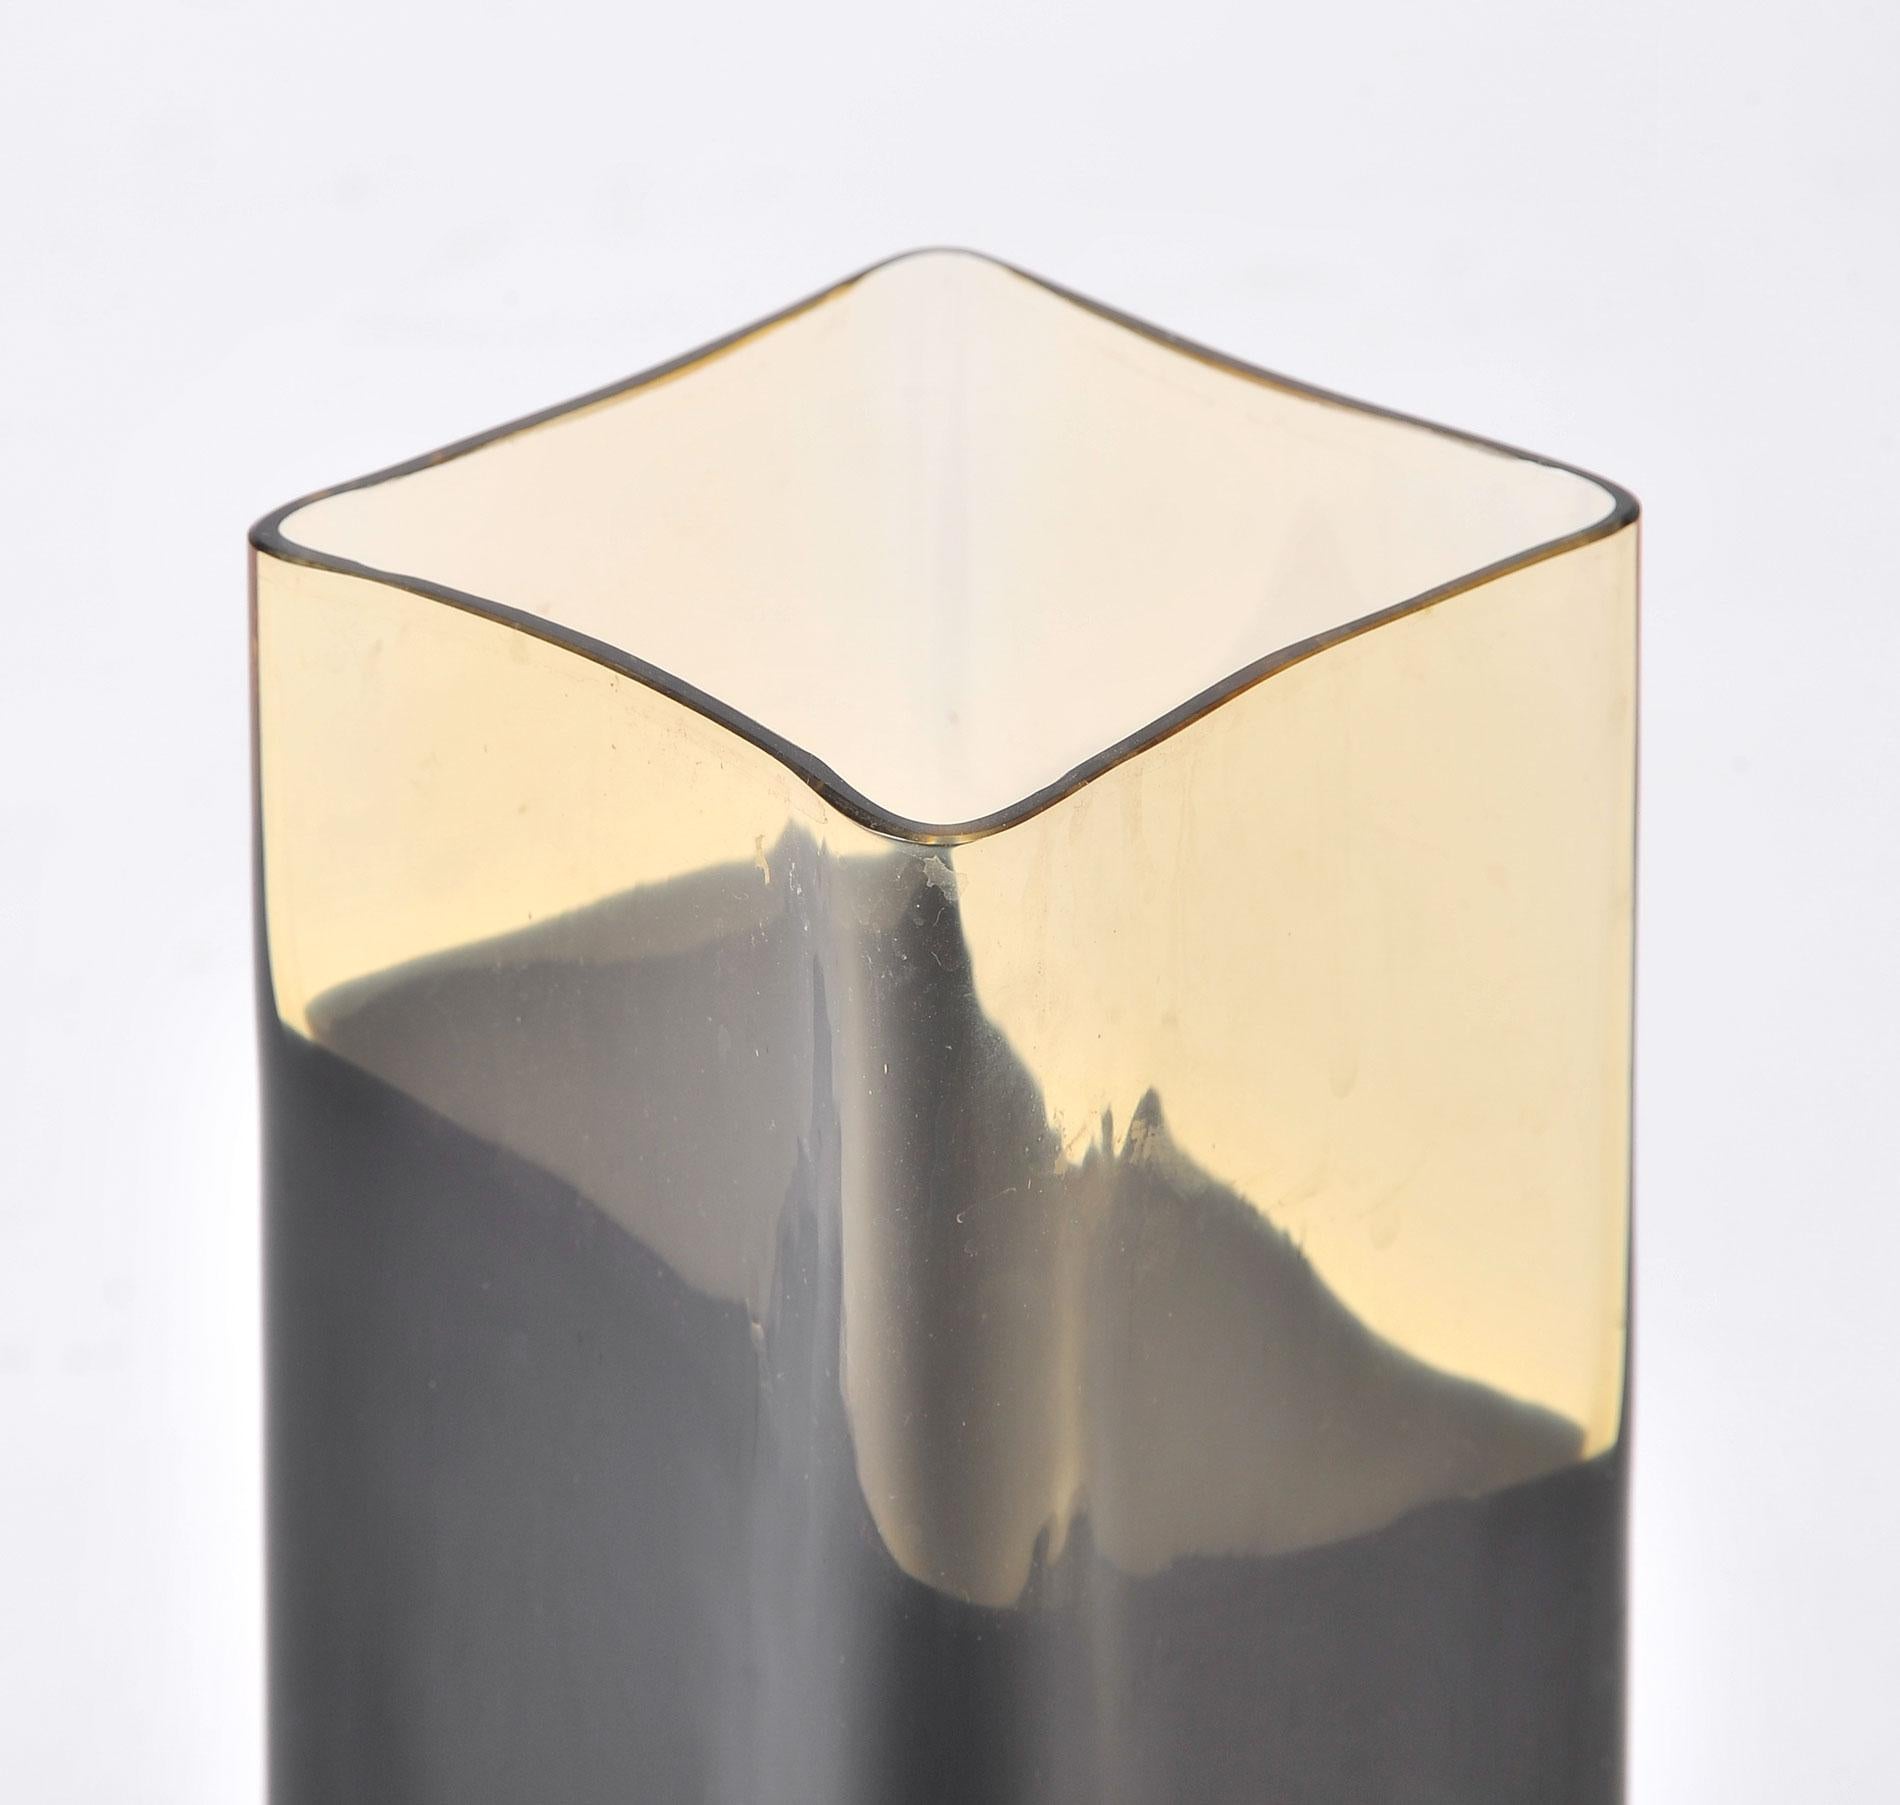 Tall rectangular vase with curved base. Amber colored glass with irregular 'dipped in black' effect.